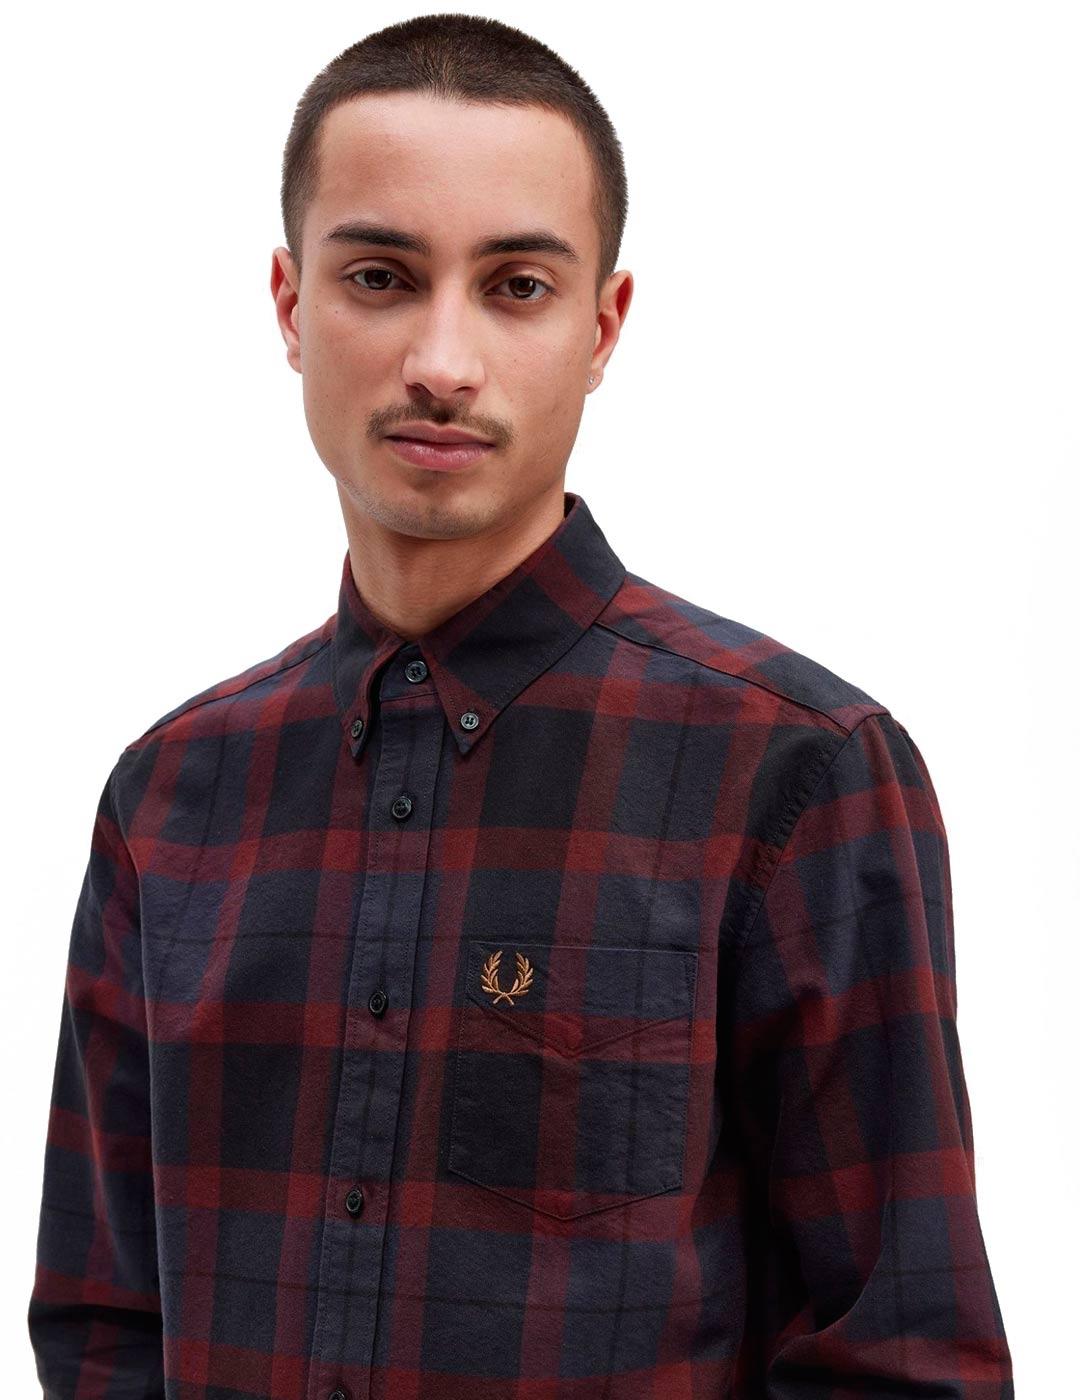 Camisa Fred Perry Cuadros Escoceses M6573 Marino Granate